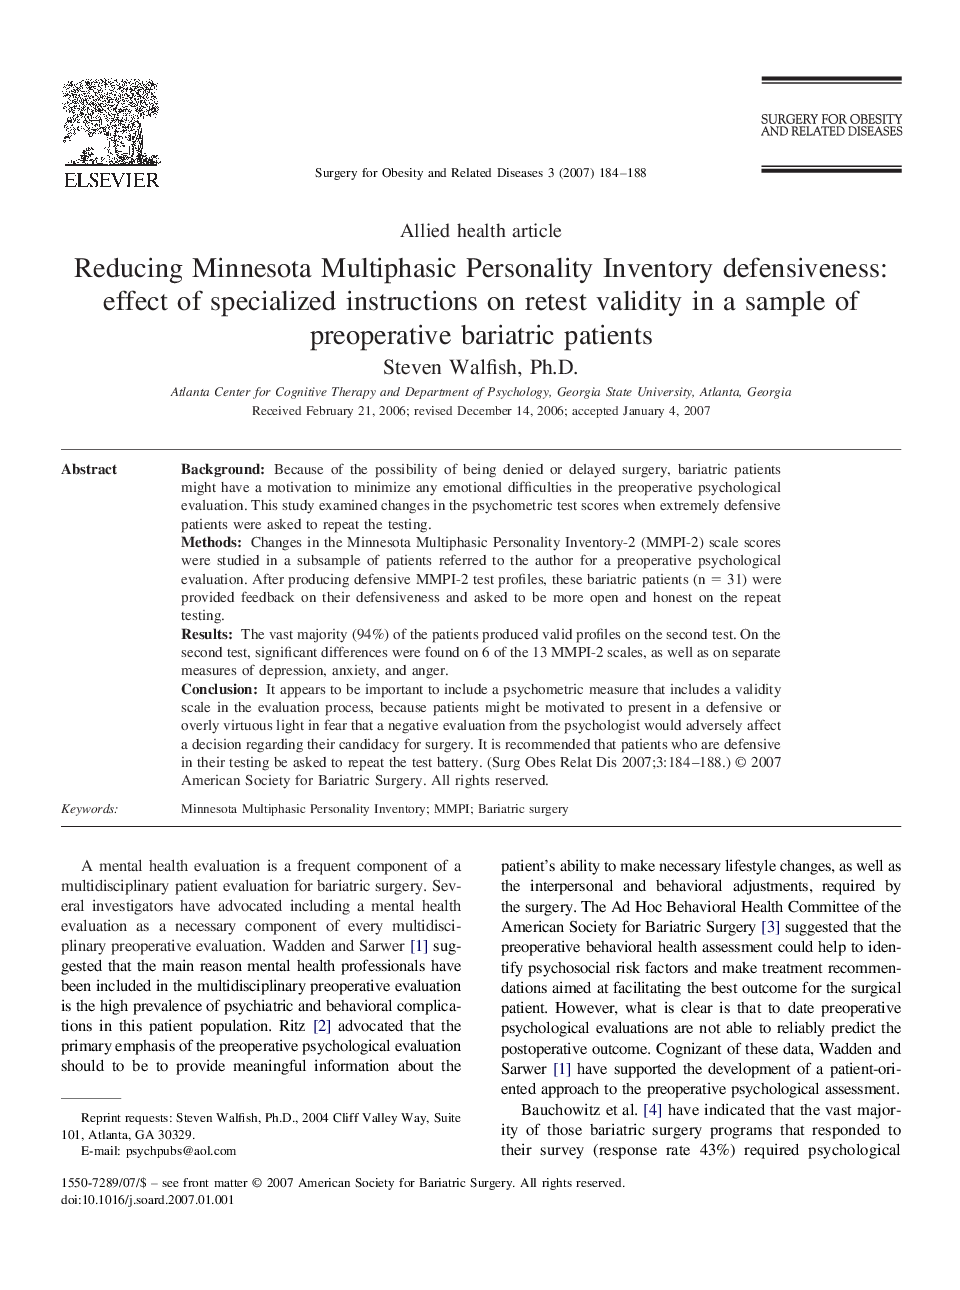 Reducing Minnesota Multiphasic Personality Inventory defensiveness: effect of specialized instructions on retest validity in a sample of preoperative bariatric patients